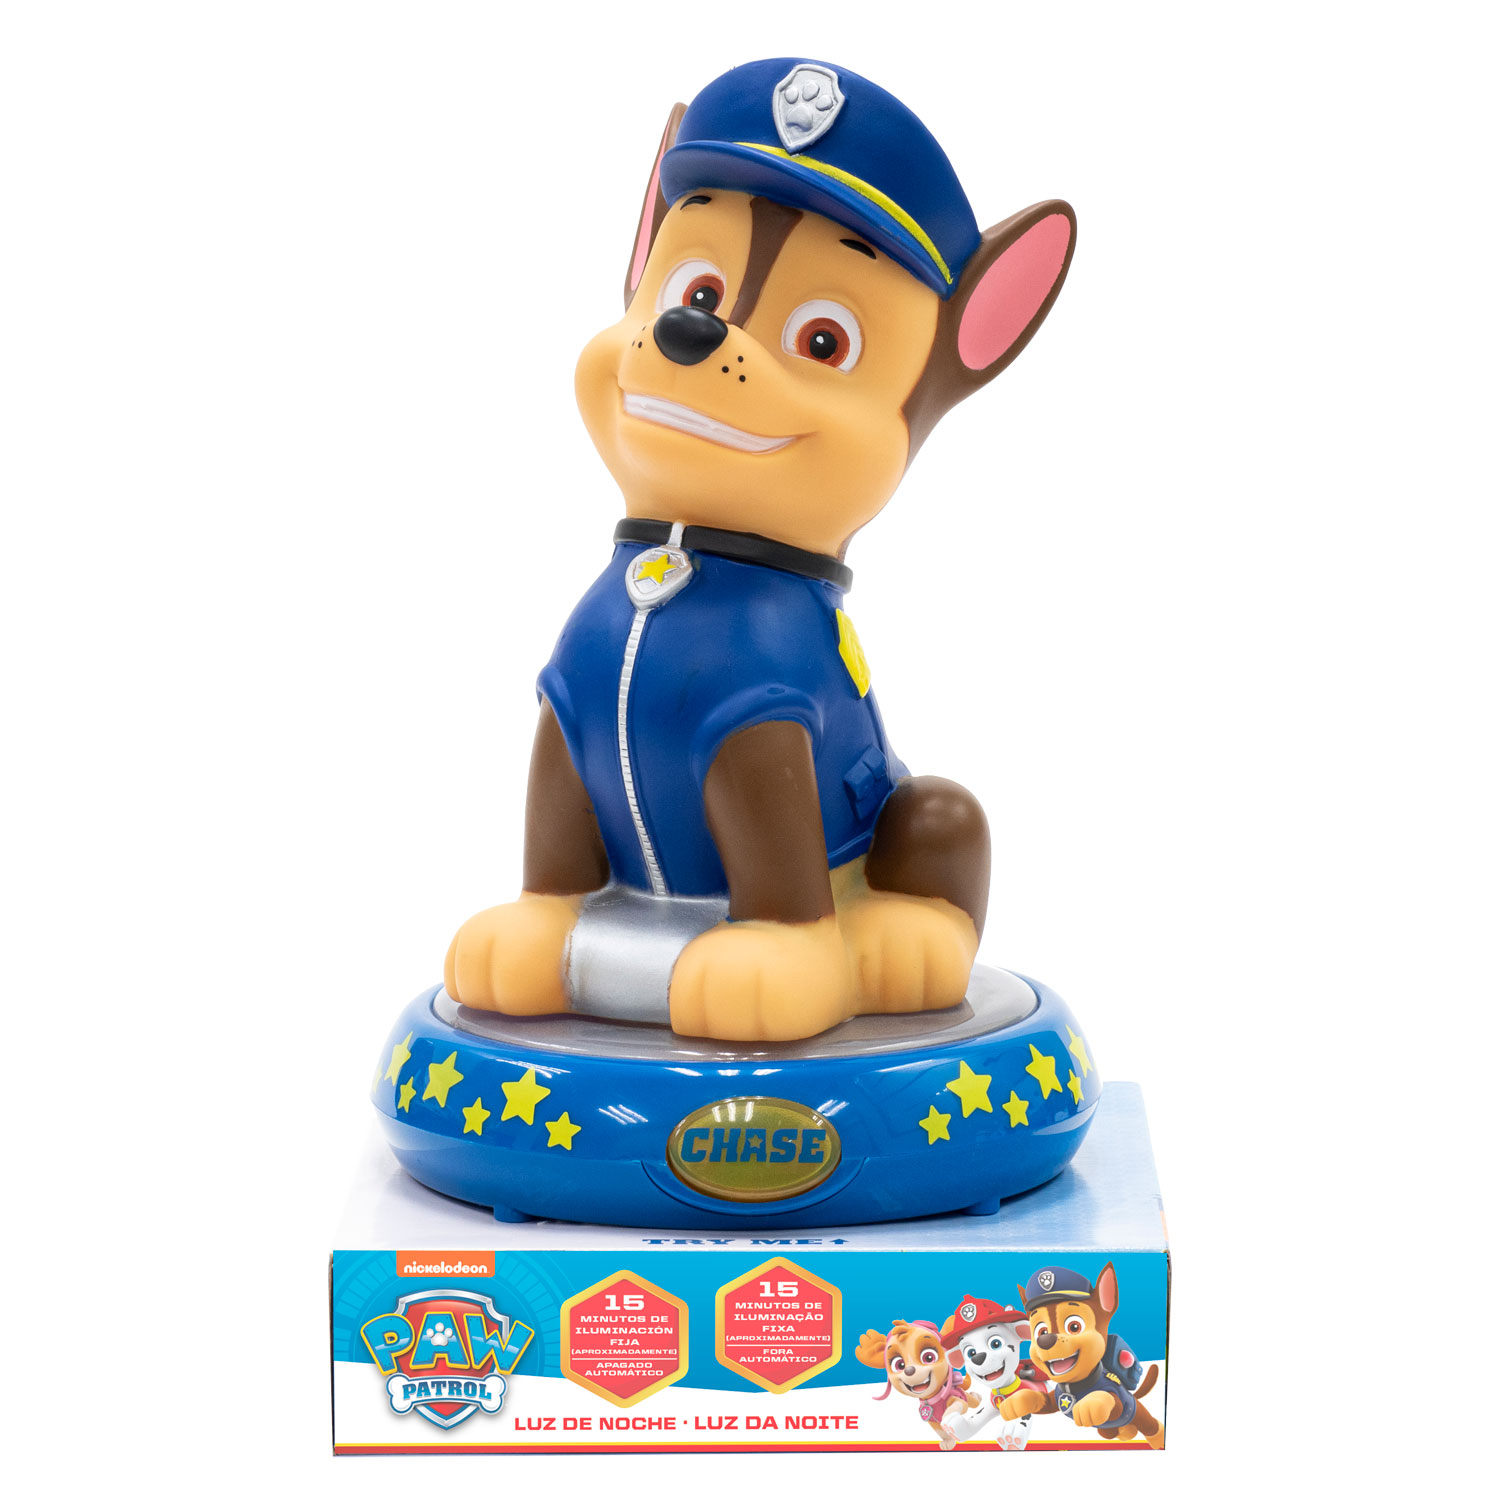 TV Cartoon Torch Present for Child Paw Patrol Chase LED Light Up Keyring 